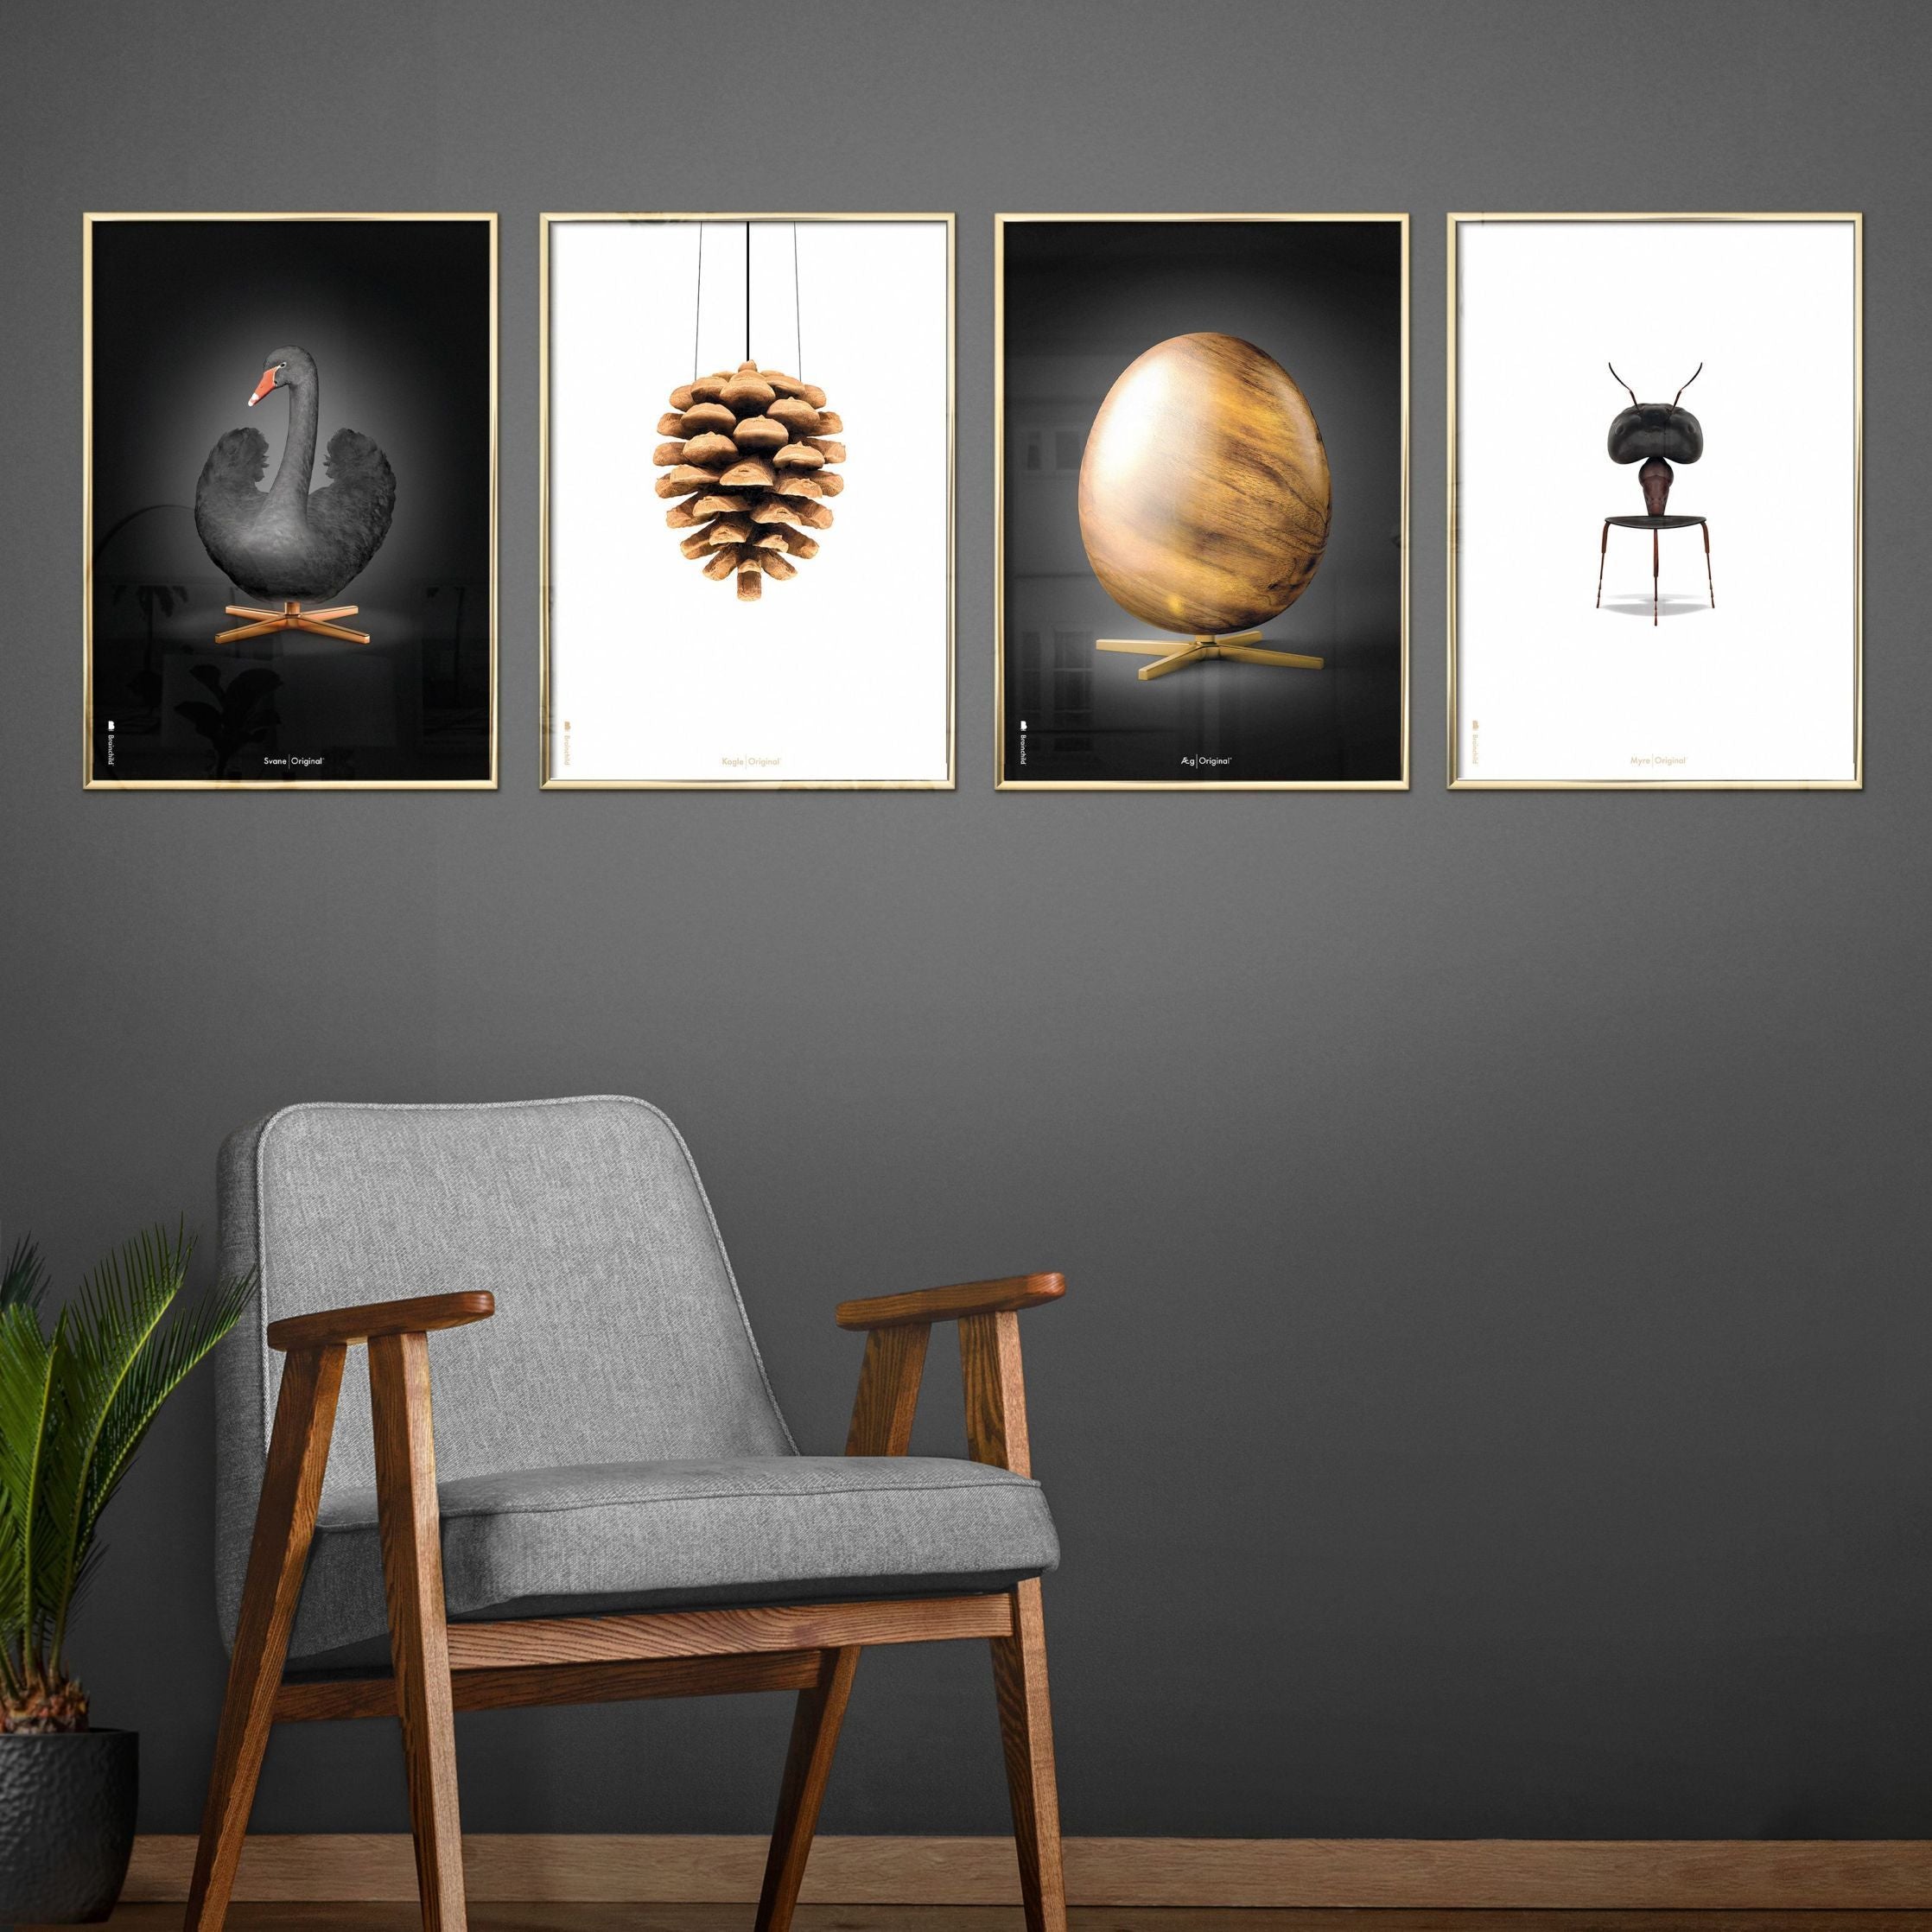 Brainchild Pine Cone Classic Poster, Frame in Black Lacquered Wood A5, White Baggrund